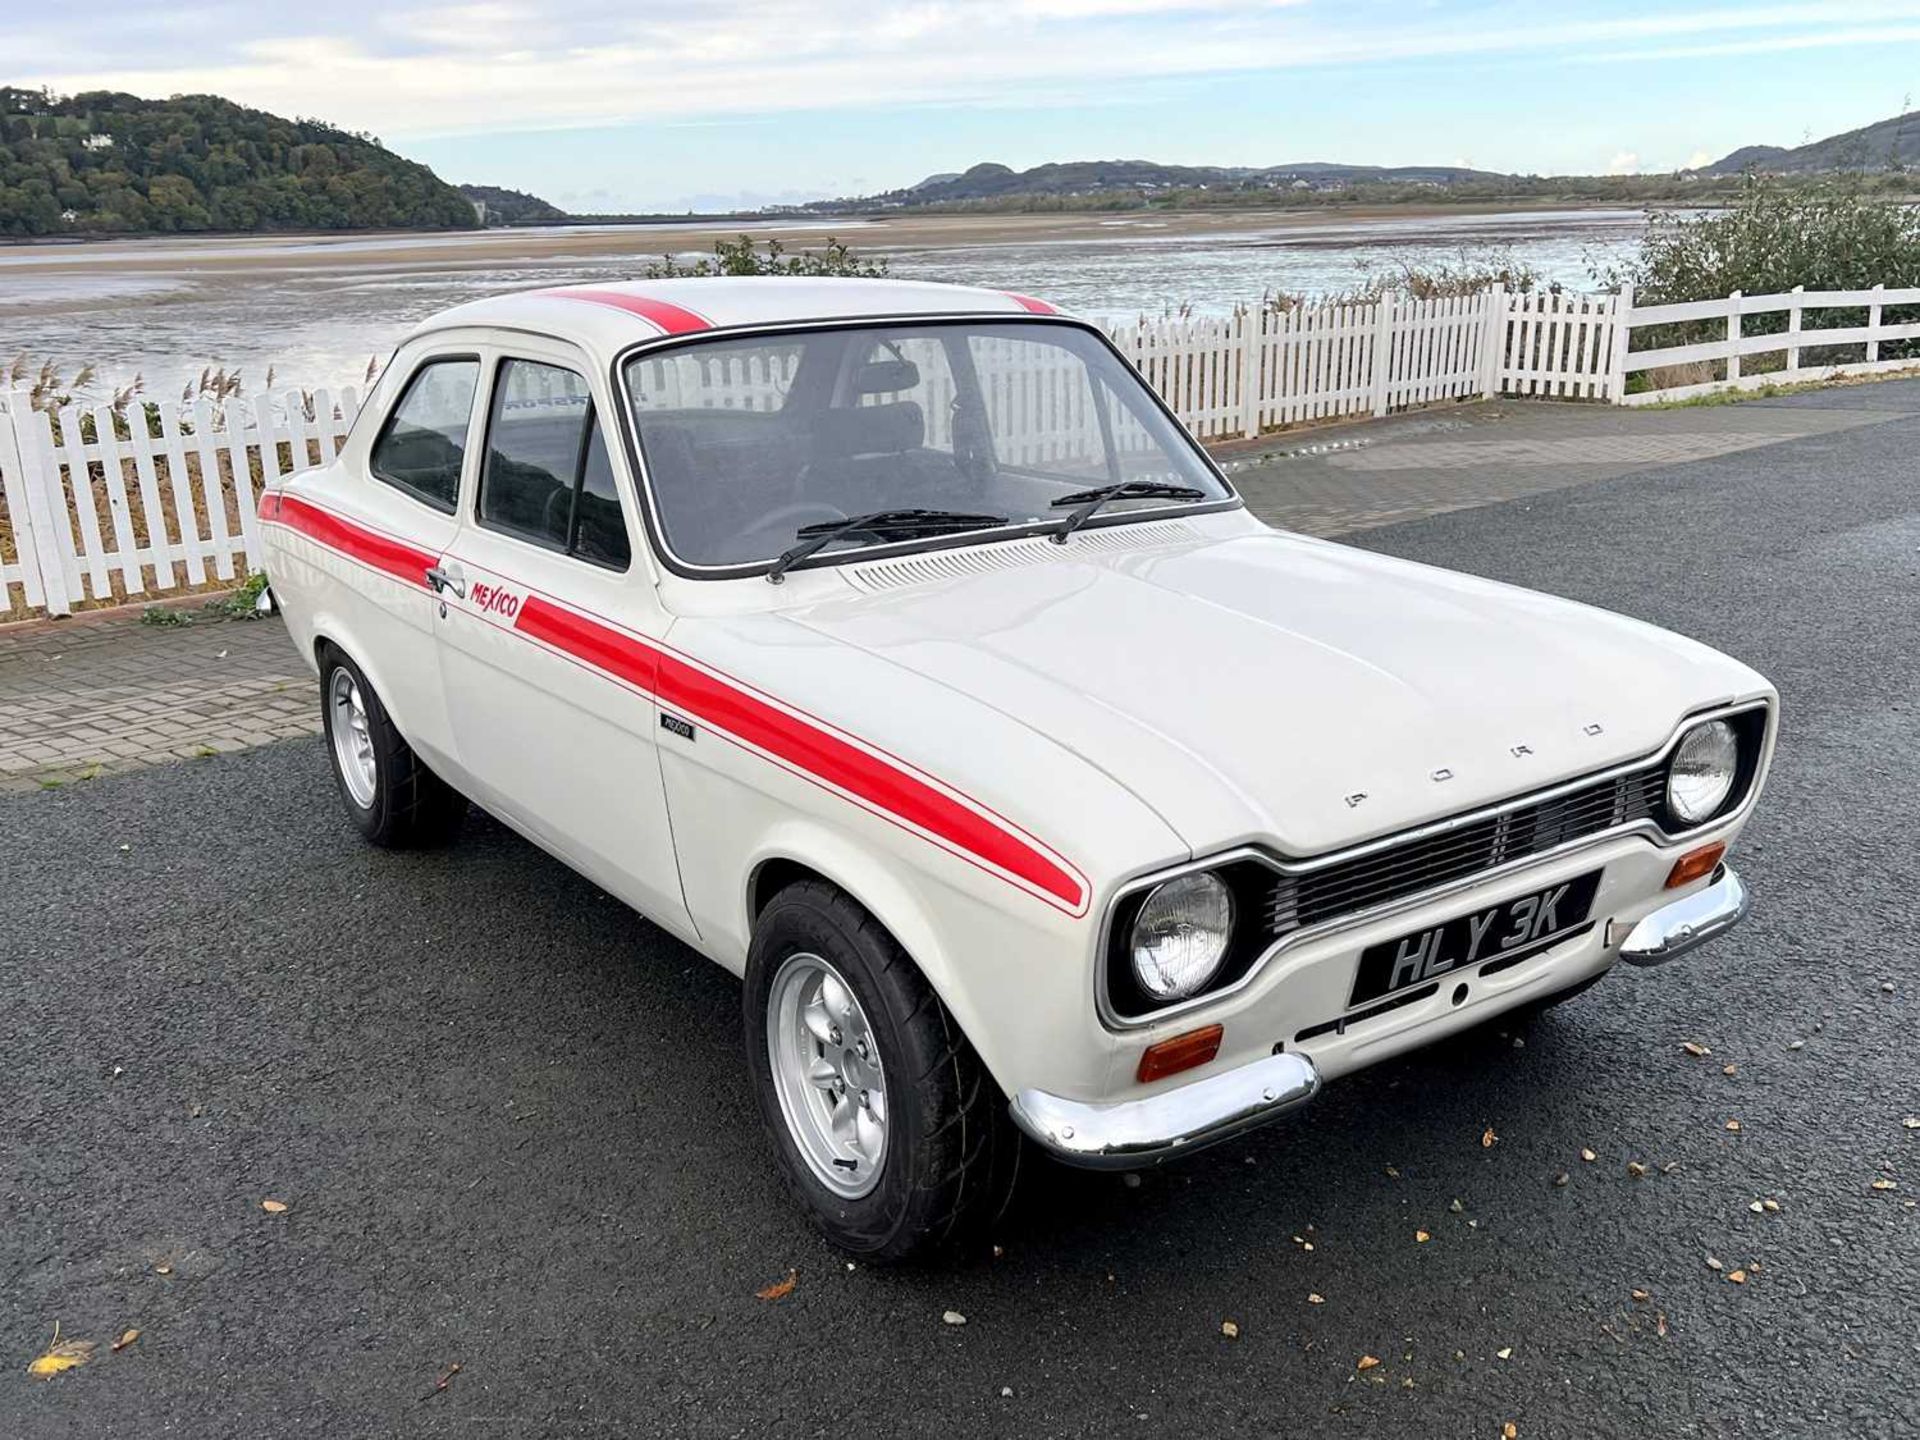 1971 Ford Escort Mexico with 2.1-litre Cosworth engine 2.1-Litre naturally aspirated Cosworth engine - Image 3 of 55